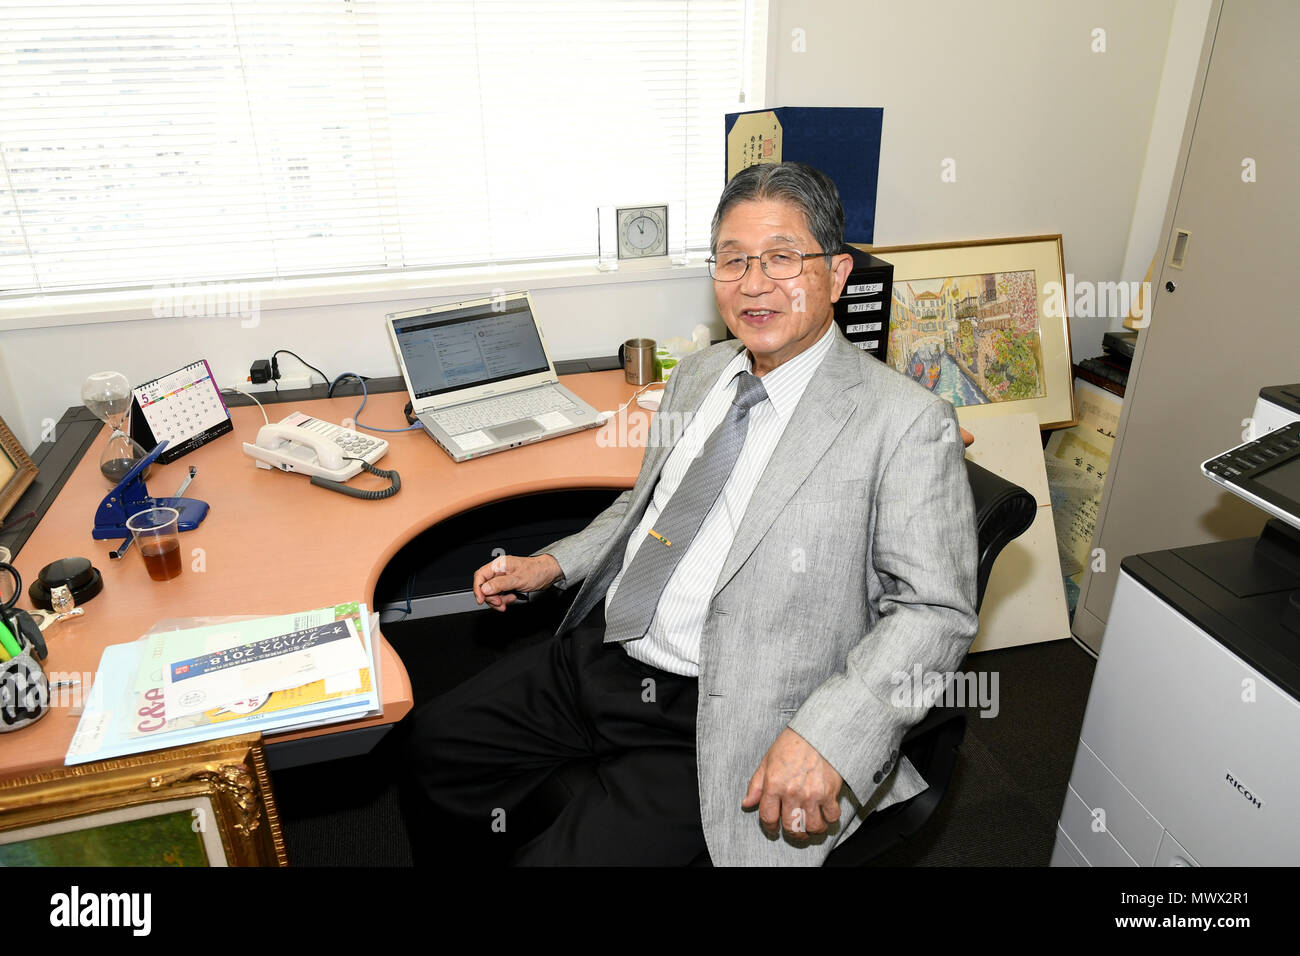 Tokyo, Japan. 29th May, 2018. Akira Fujishima, famous Japanese chemist and former president of Tokyo University of Science, works in his office in Tokyo, Japan, on May 29, 2018. TO GO WITH XINHUA FEATURE: Famed Japanese chemist Fujishima's Chinese complex. Credit: Hua Yi/Xinhua/Alamy Live News Stock Photo